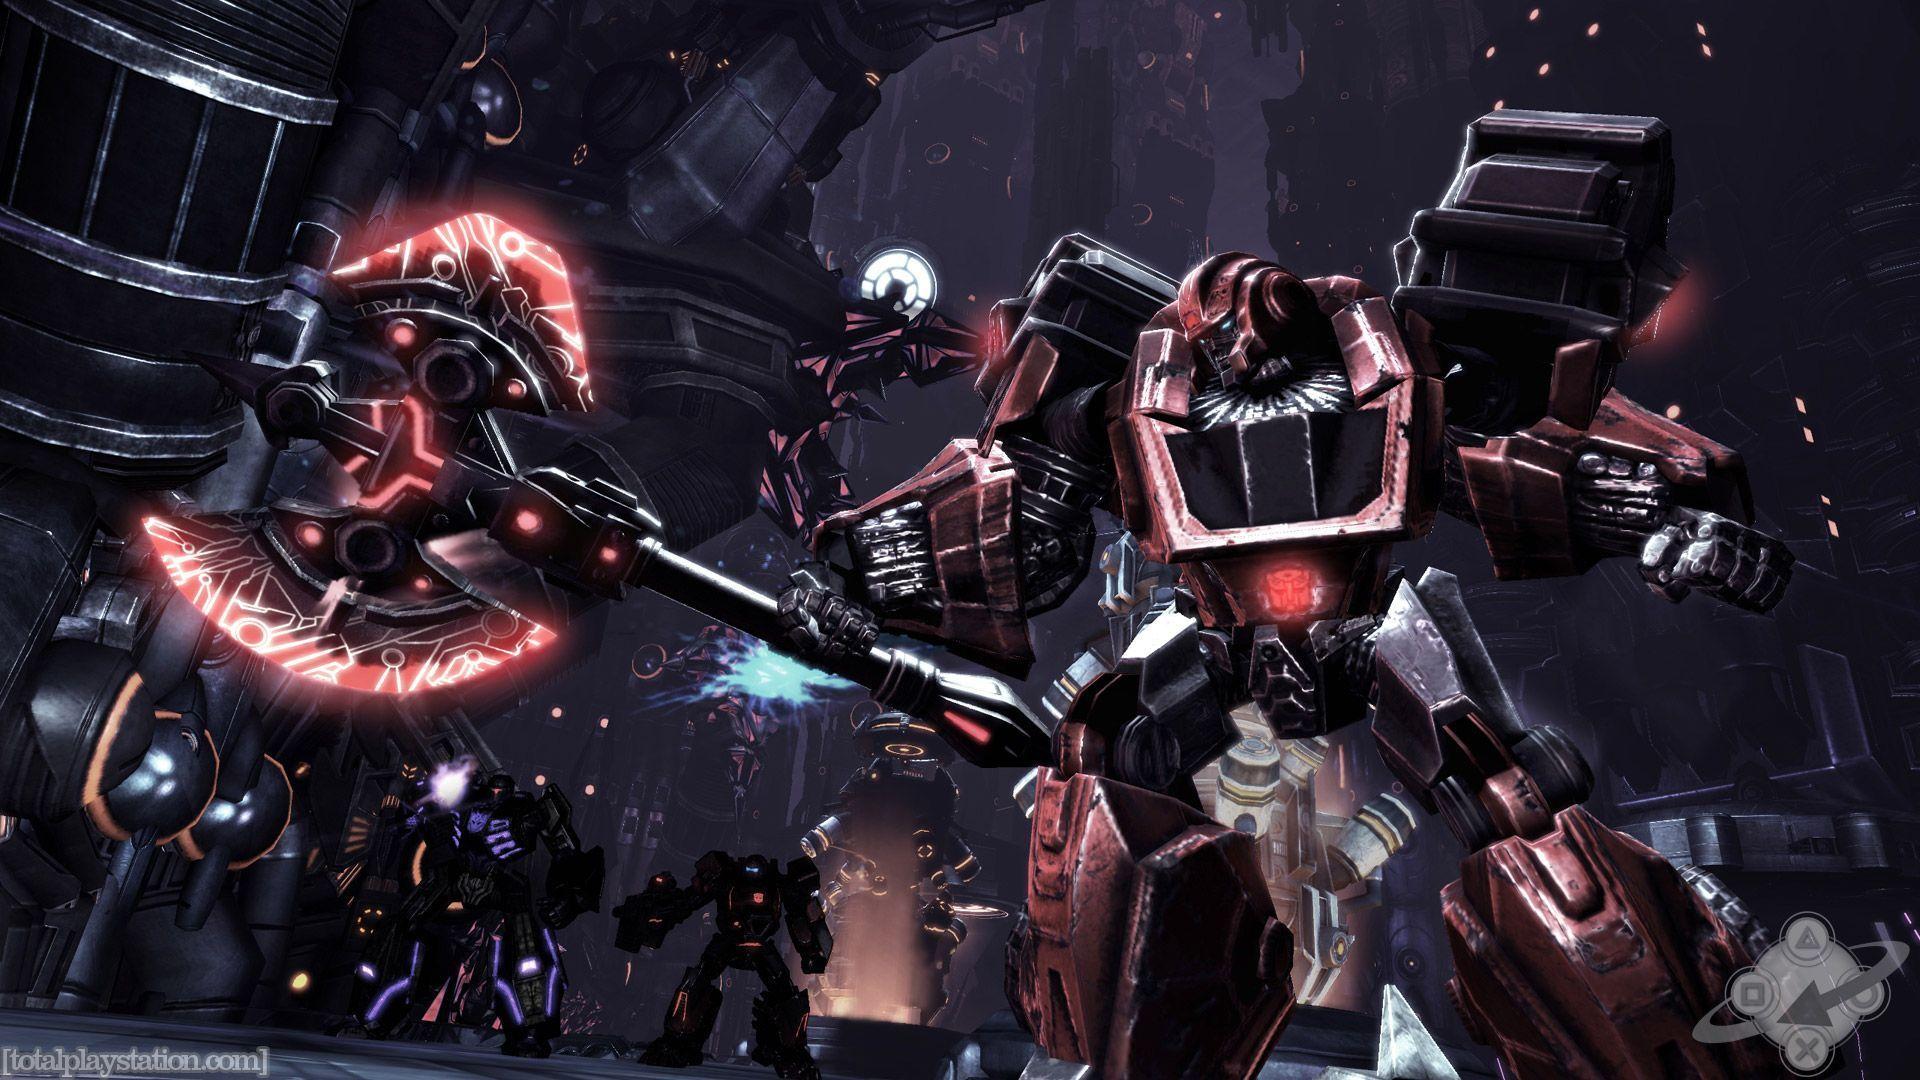 image For > Optimus Prime War For Cybertron Wallpaper